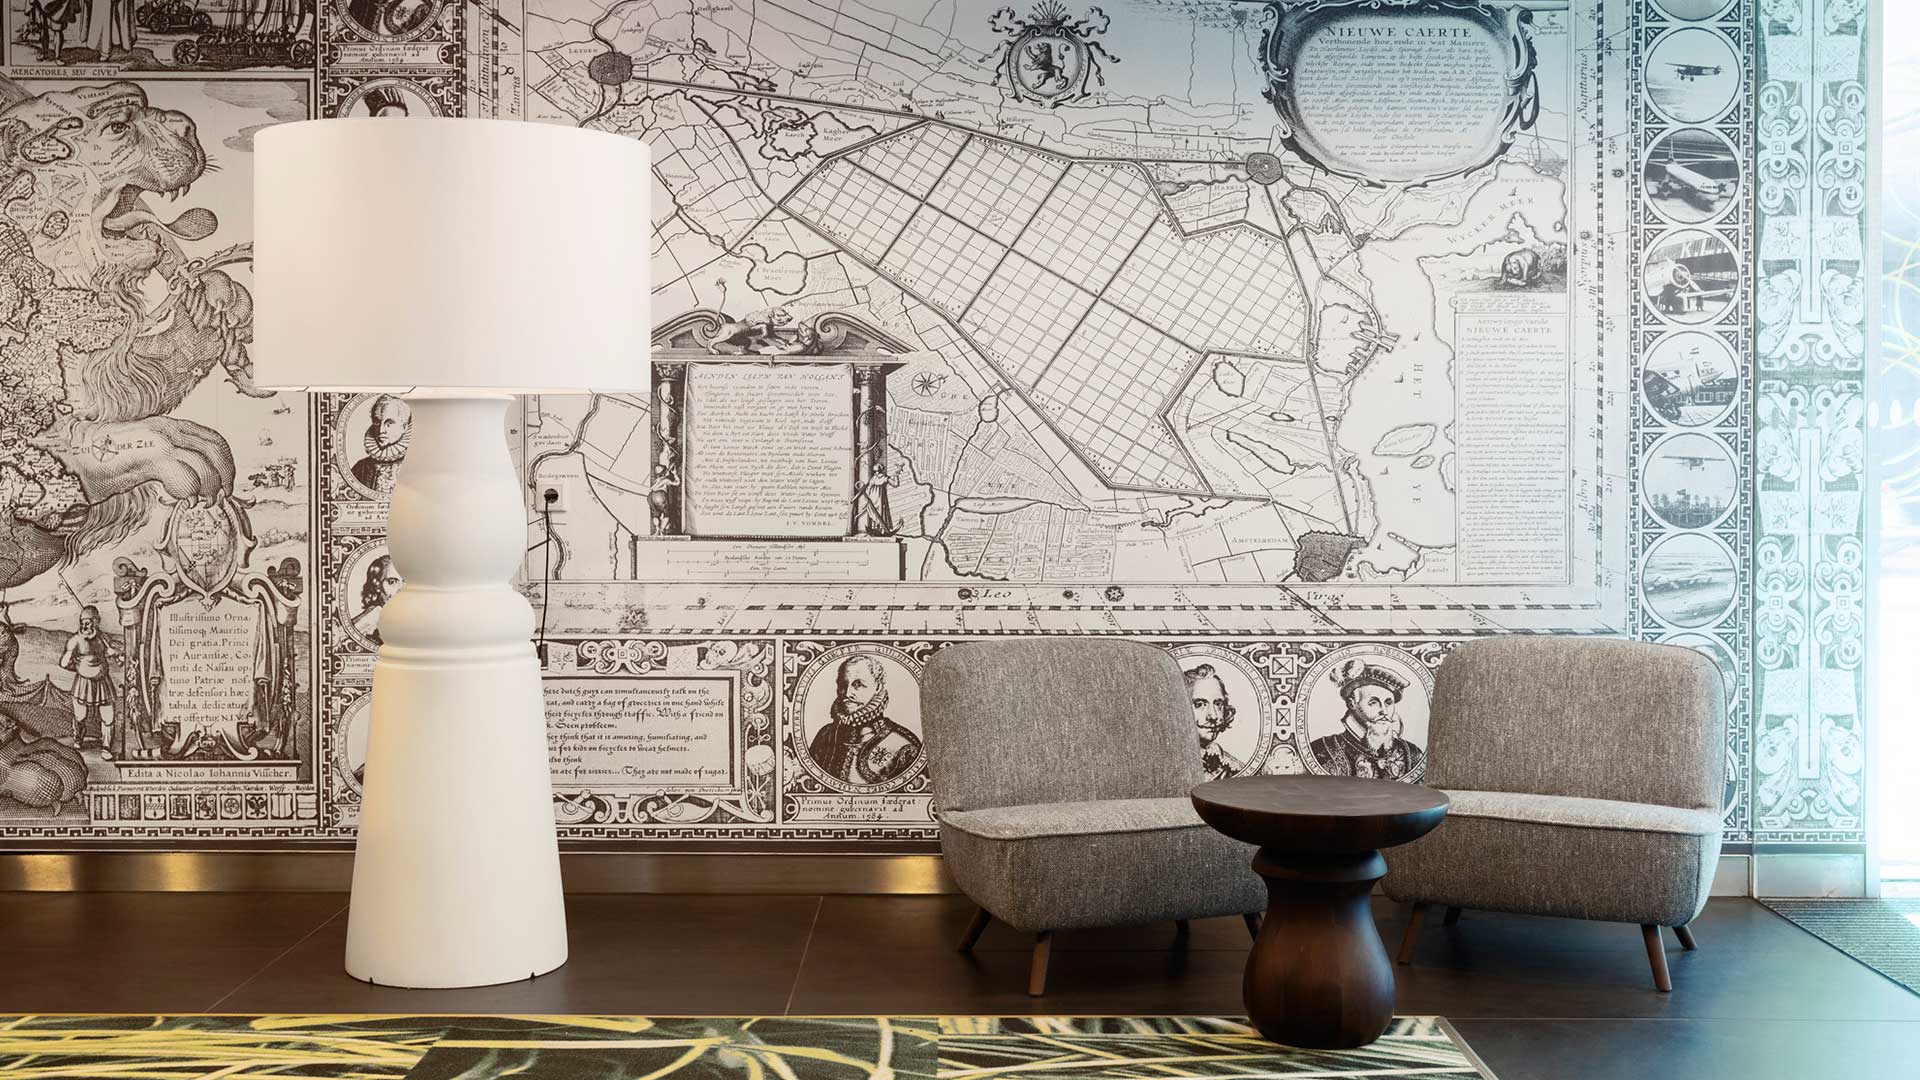 Marcel Wanders studio creates interior design of VIP centre and refreshes  existing spaces at Amsterdam Airport Schiphol by Marcel Wanders studio